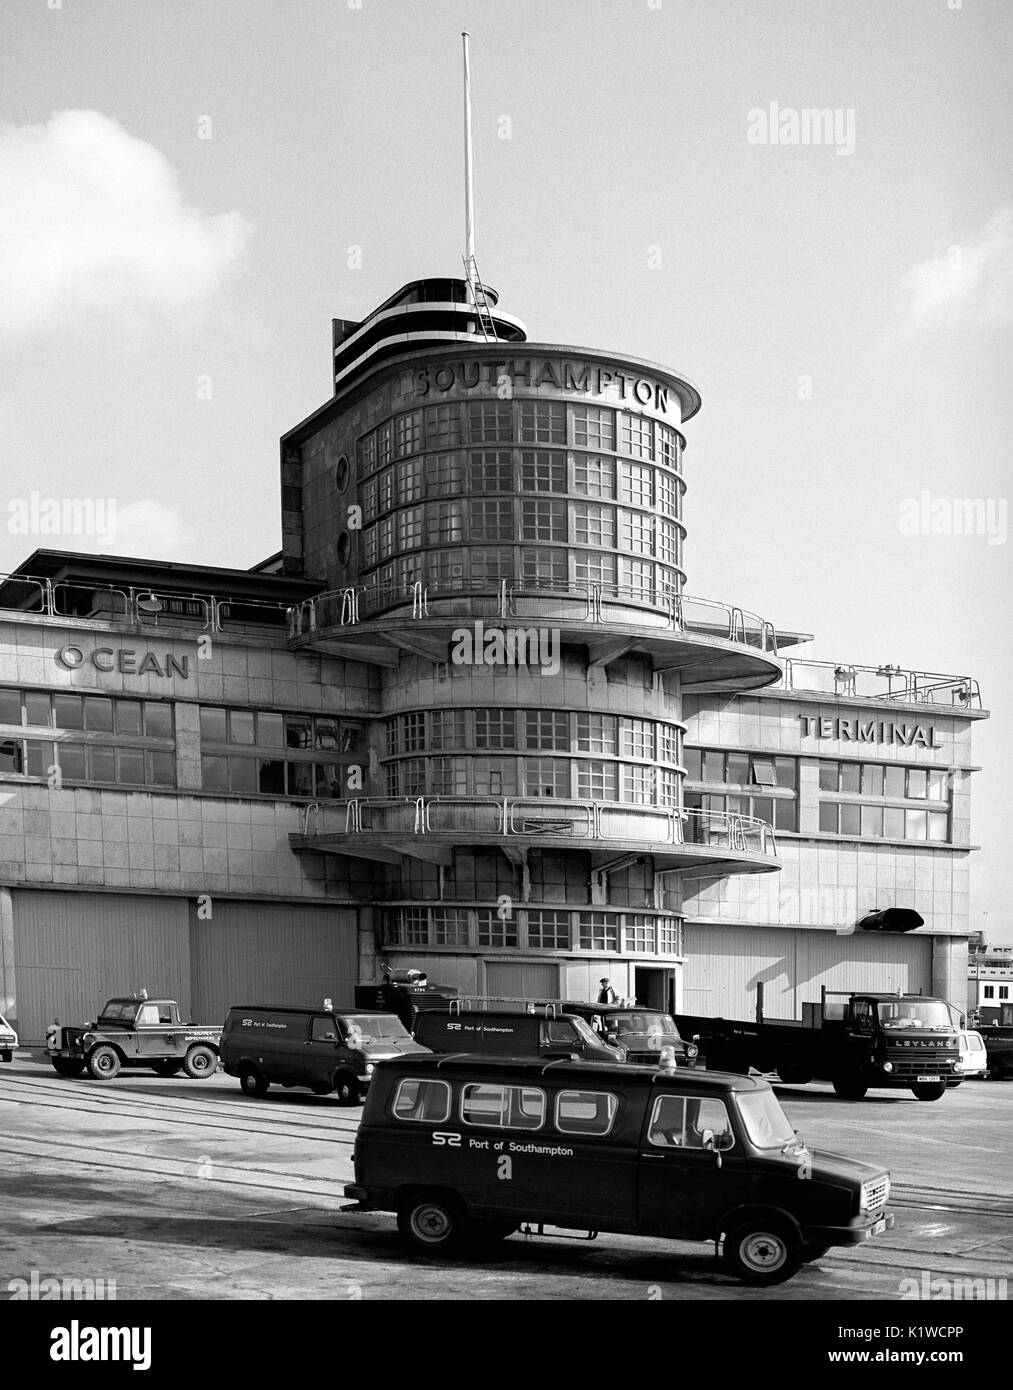 Southampton docks Art Deco Ocean Terminal, Southampton, opened in 1950 and demolished in 1983 - photograph taken as workmen arrived to start the demolition April 1983 Stock Photo